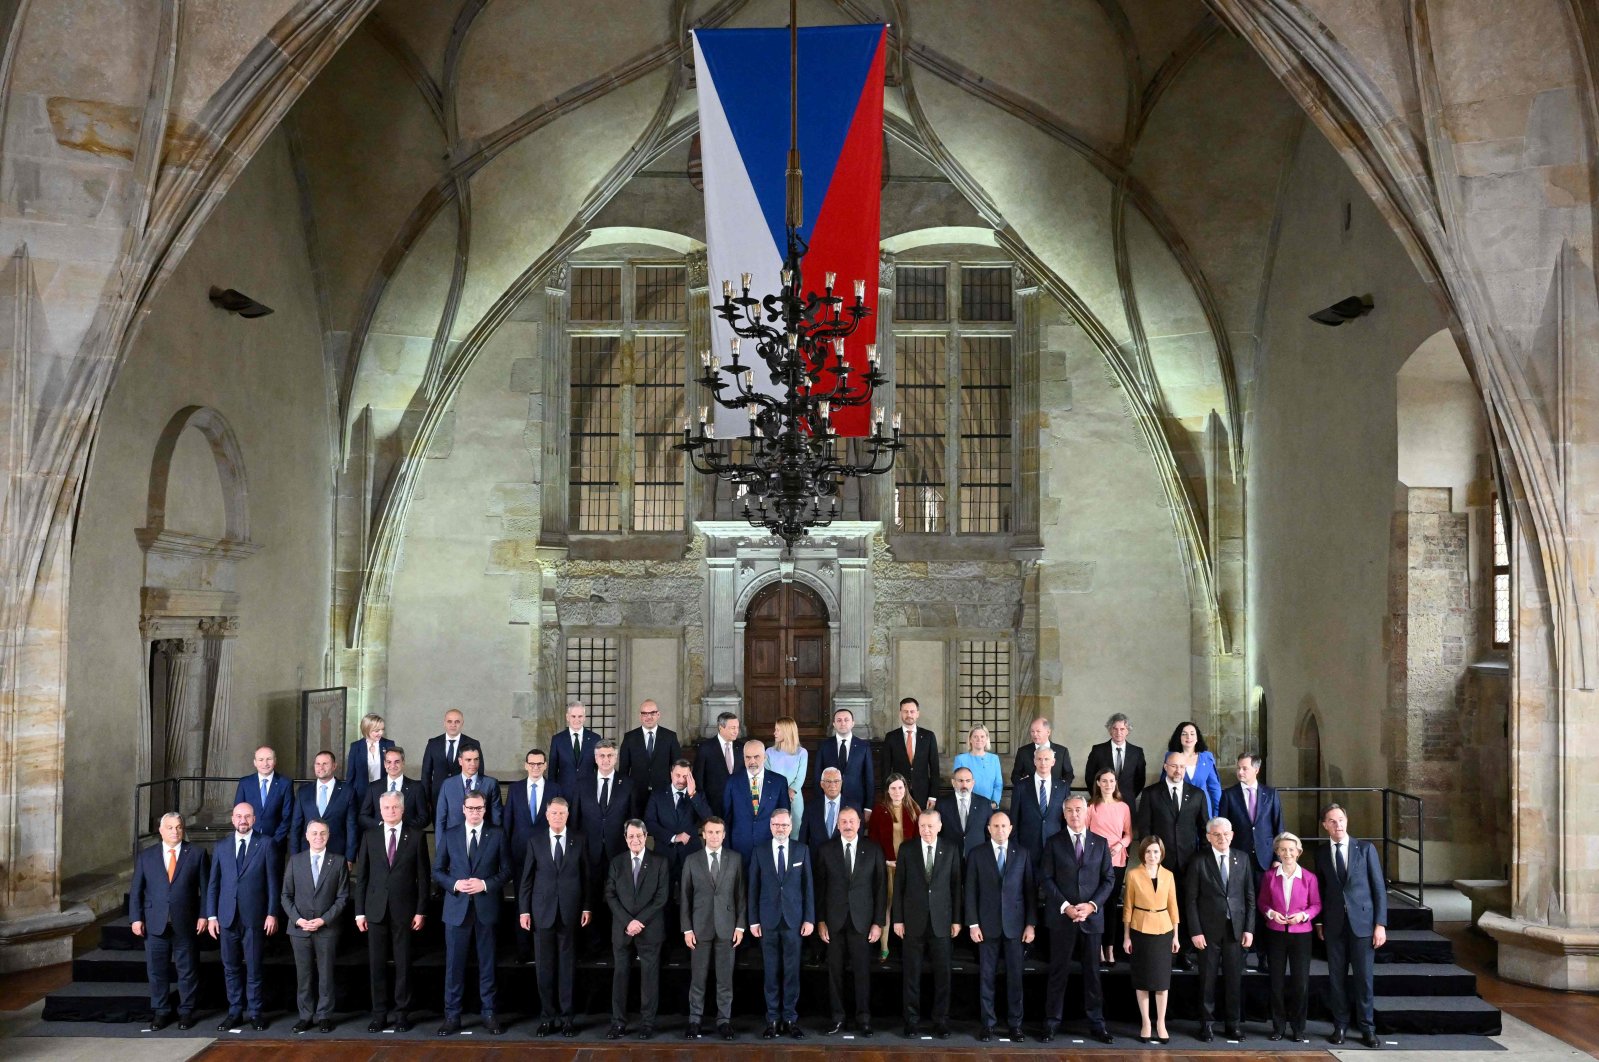 Participants pose for a family photo as they attend the European Political Community summit in Prague, Czech Republic, Oct. 6, 2022. (AFP Photo)